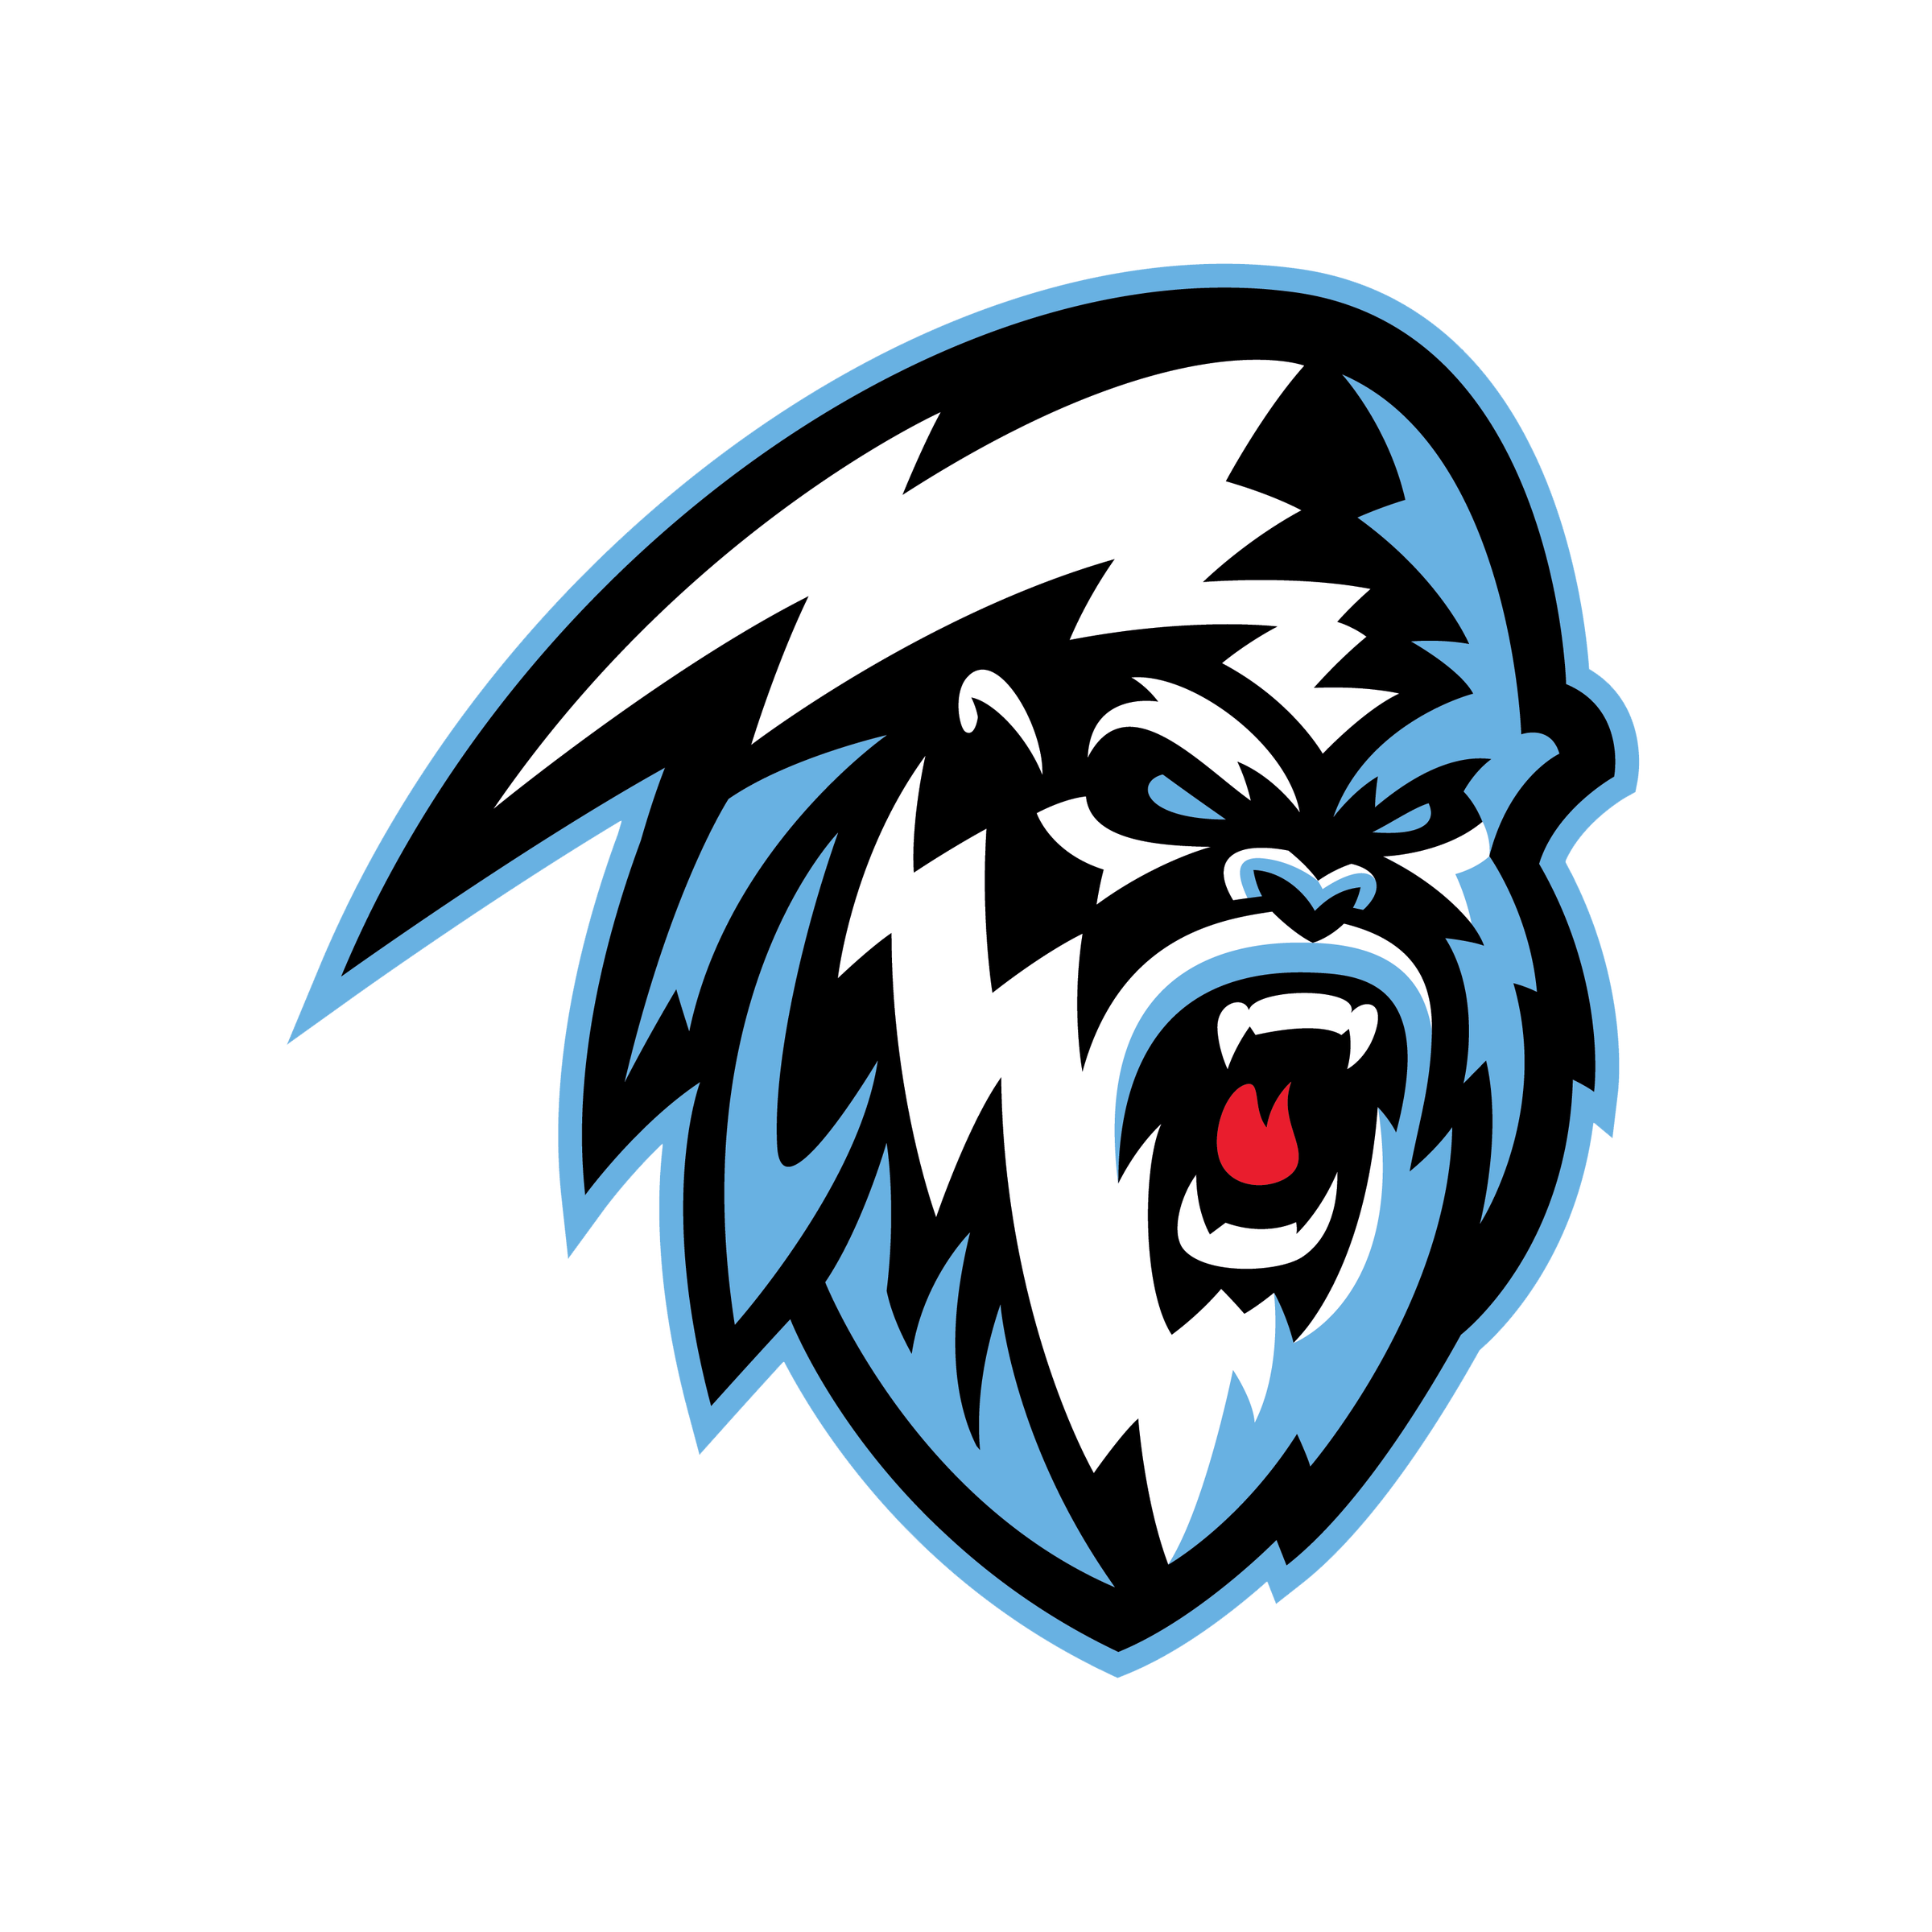 Winnipeg ICE Hockey Club - The ICE Gear Shop is your Go-To for all Winnipeg  ICE Apparel! Jerseys, Shirts, Sweaters, Hats, Accessories & More! SHOP  ONLINE ➡️